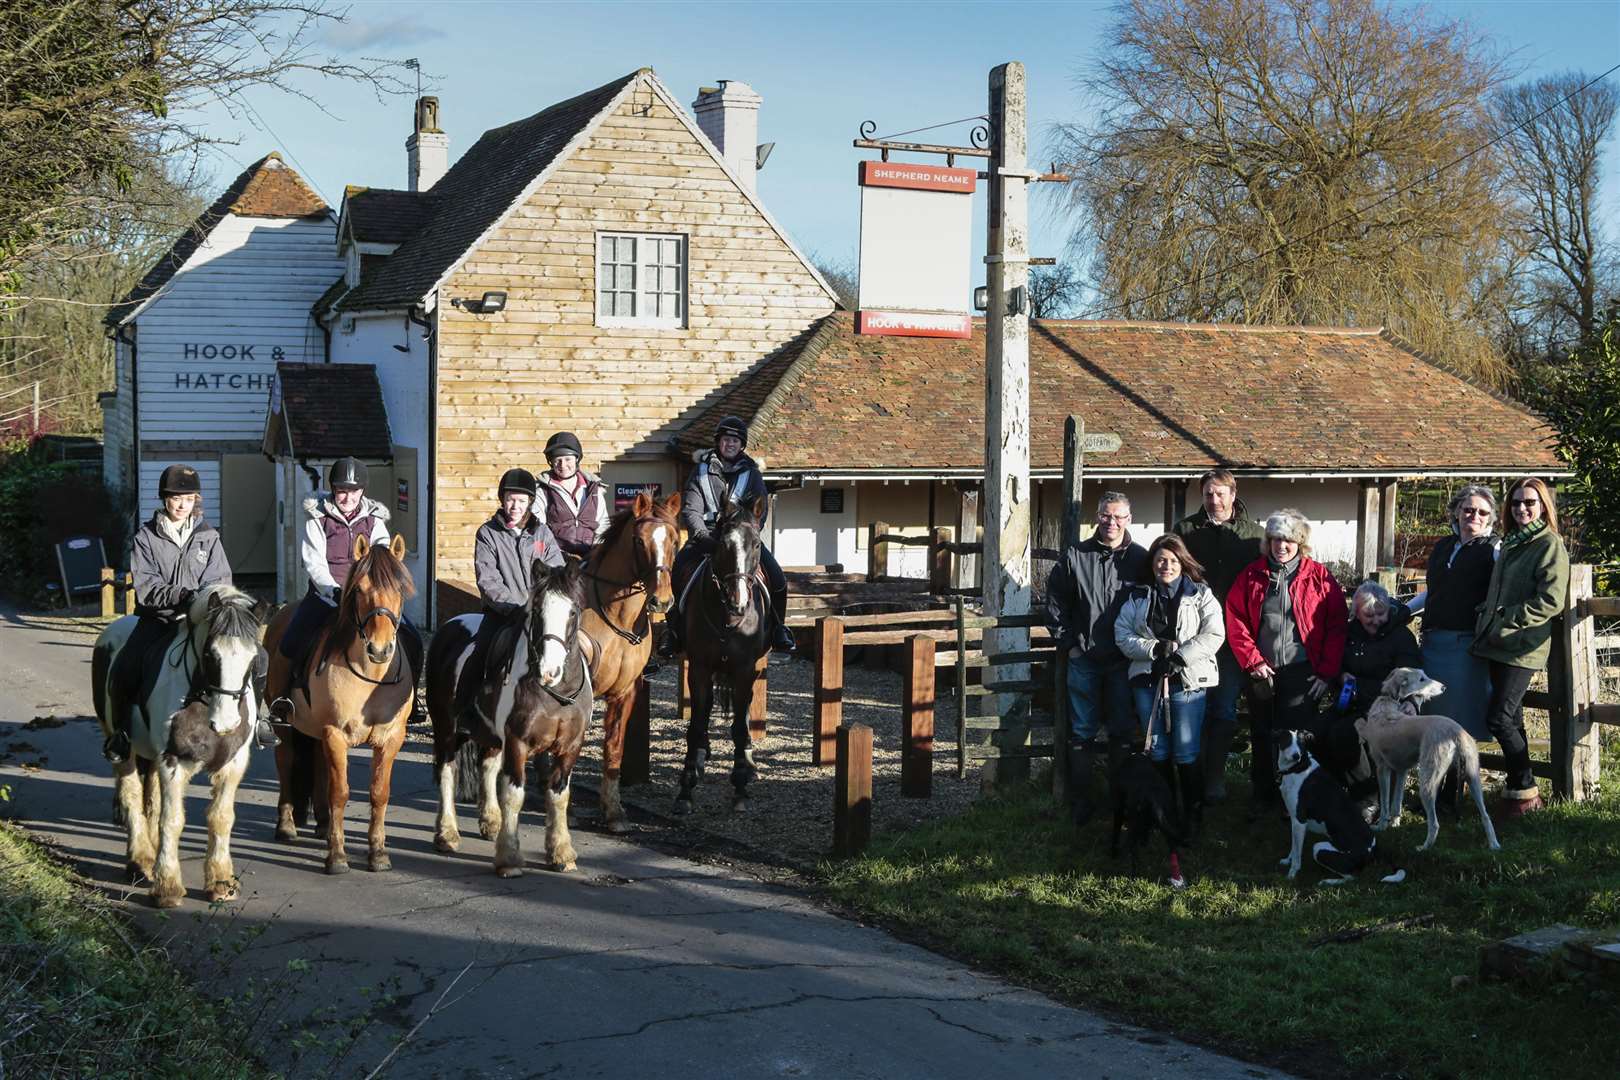 Villagers and business owners who are pulling together to buy the pub